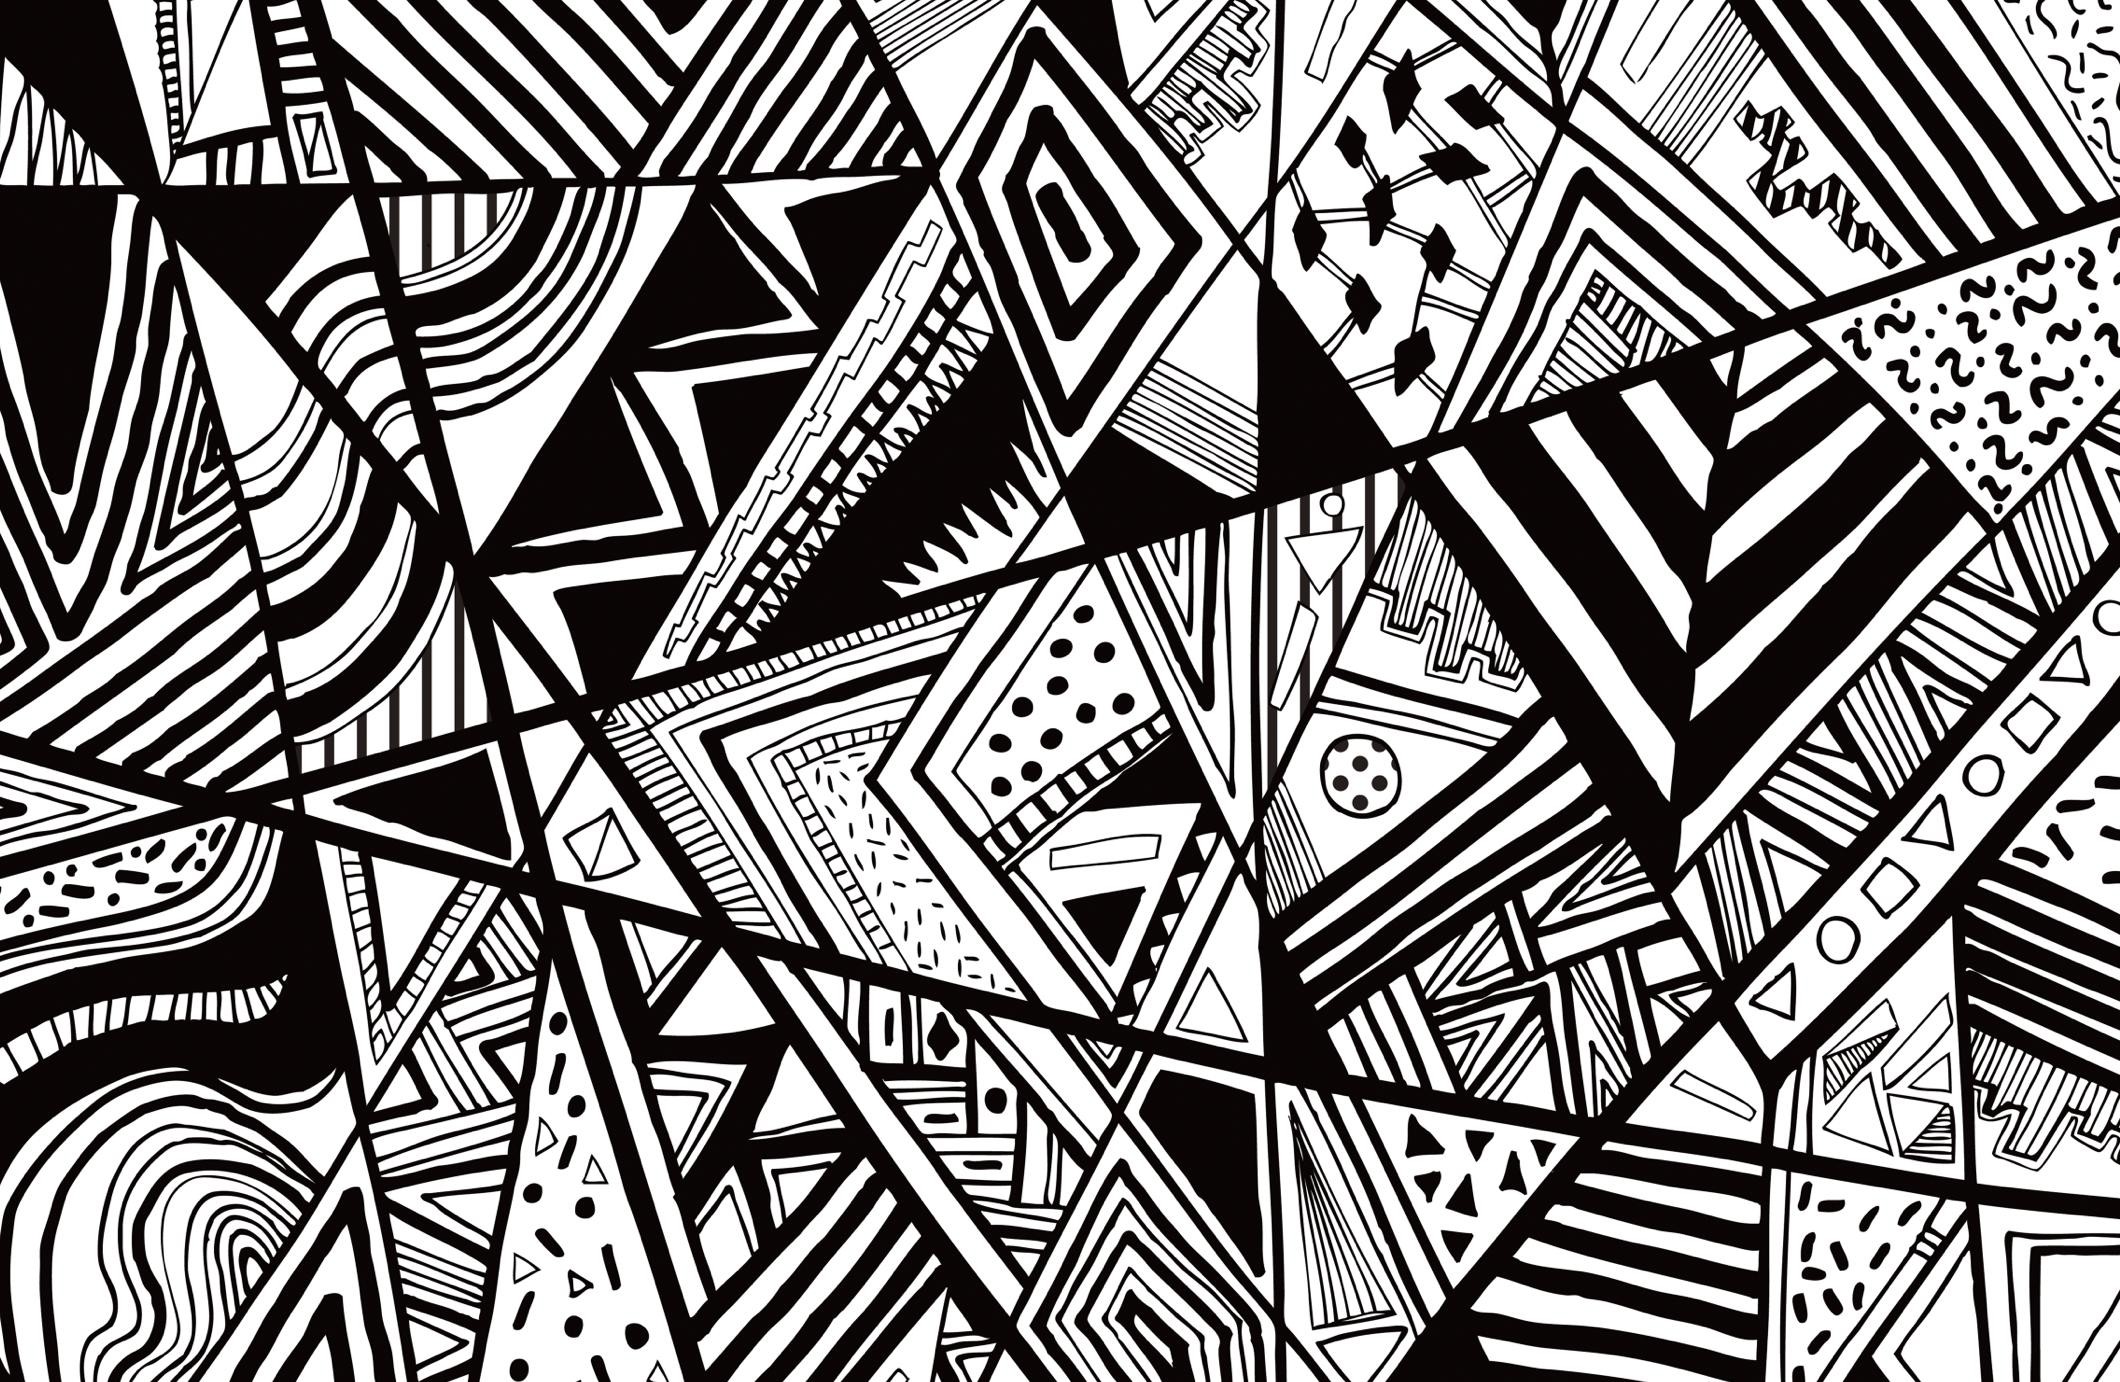  Black  and White  Abstract  Wallpaper    WallpaperTag